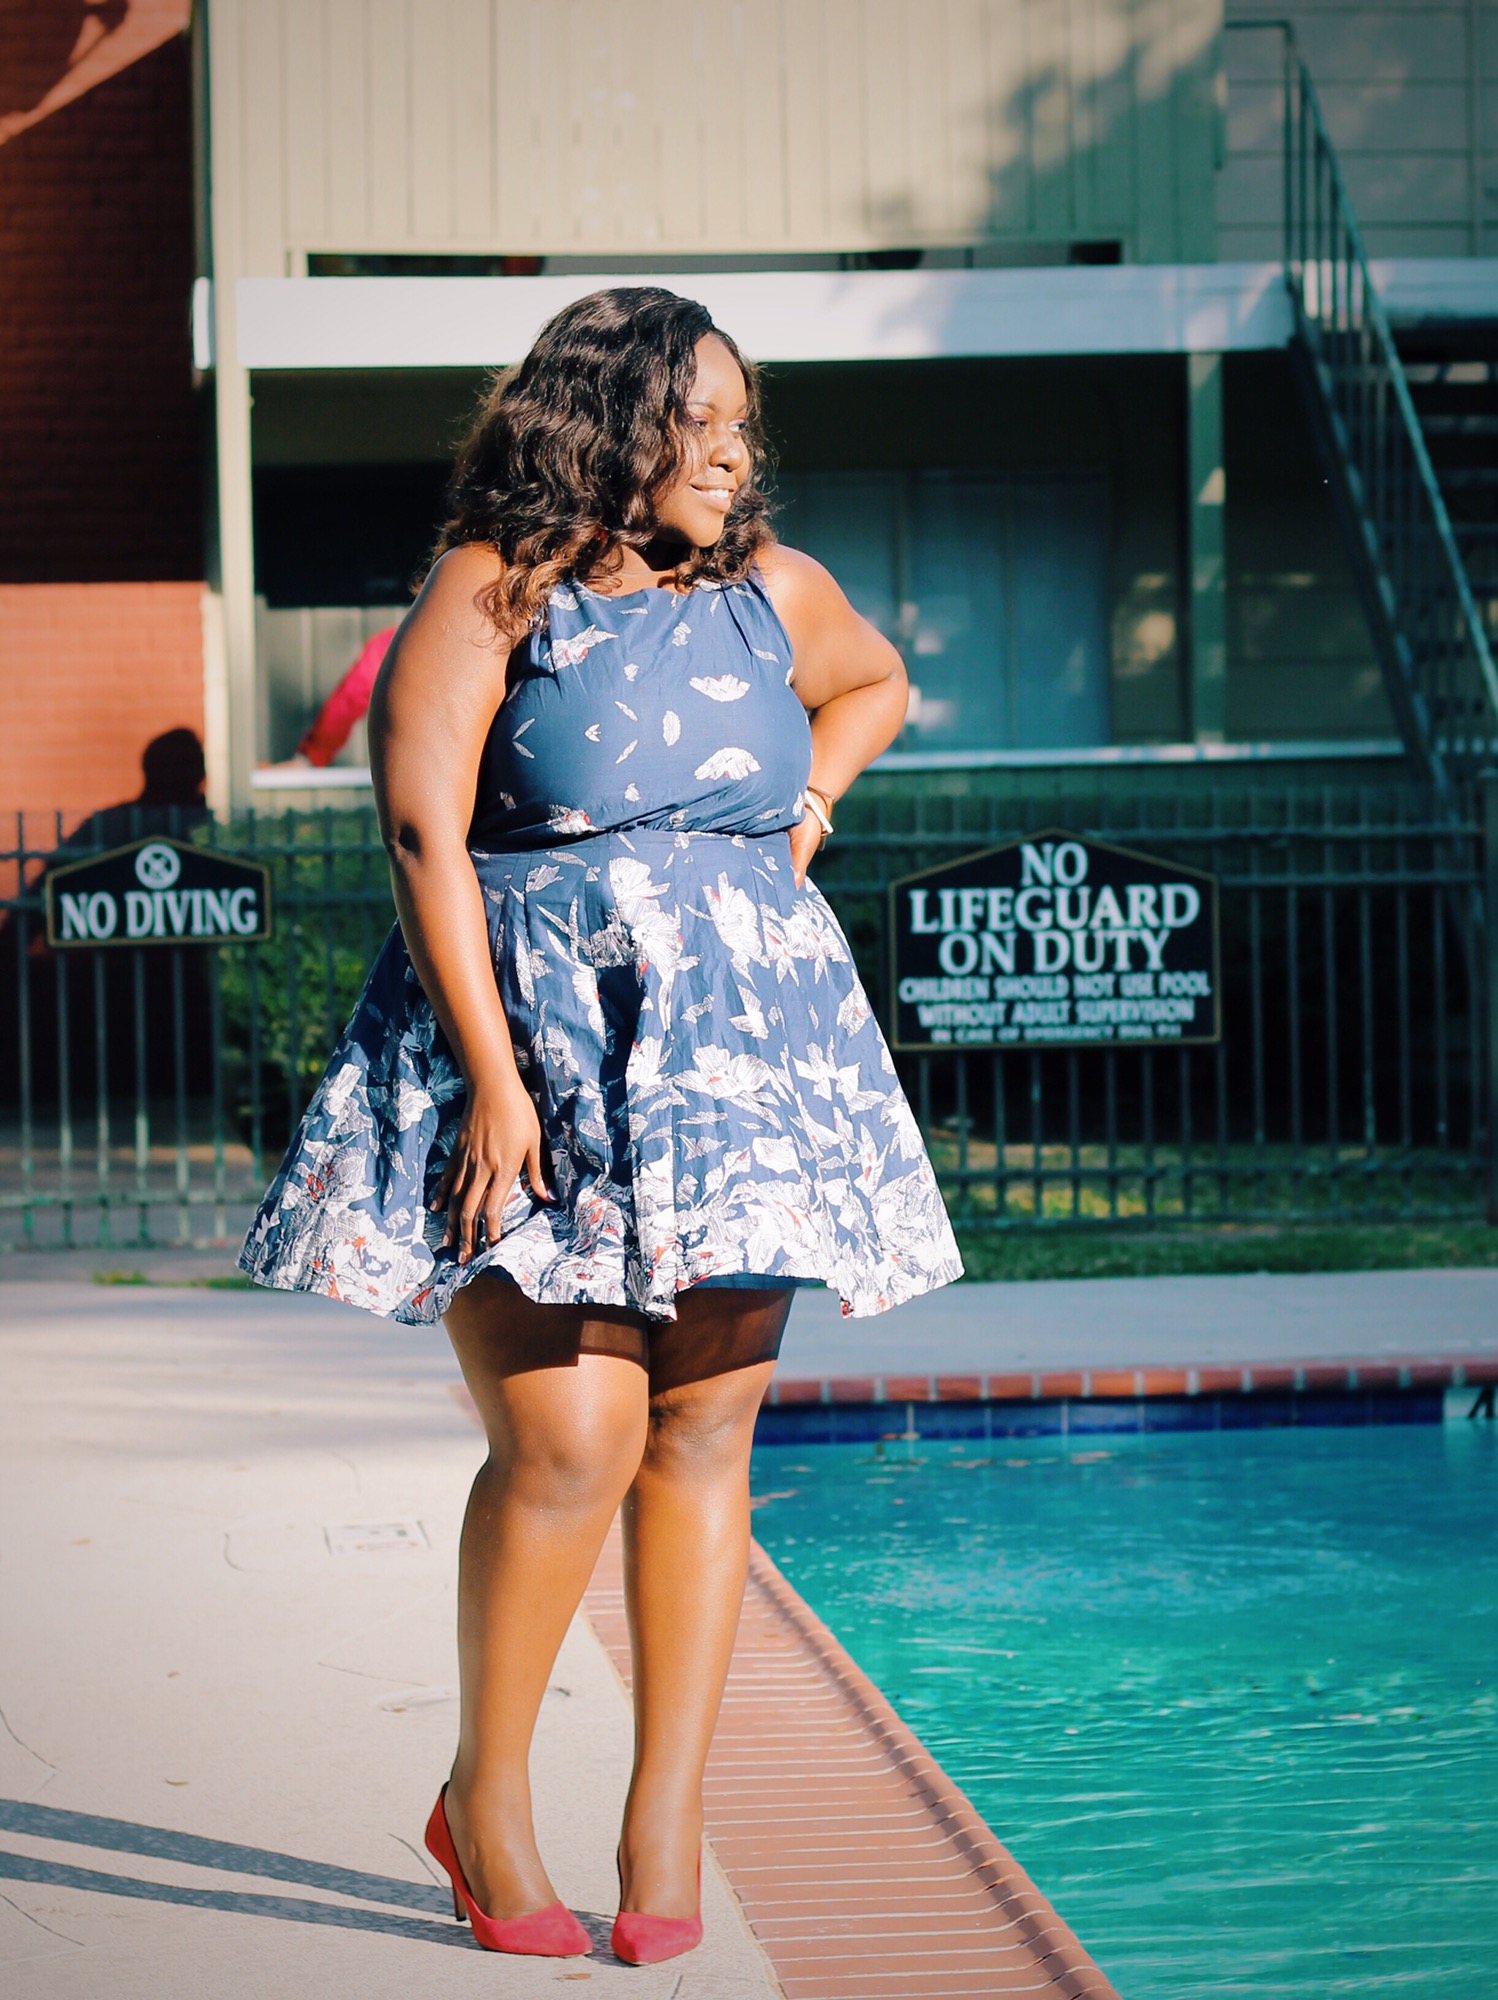 asos curve bloggers, nordstrom rack dresses, beautiful curvy girls, curvy style dark skin fashion blogger curvy style blogger, dark skin beauty blogger, dark skin blogger, houston blogger, inspiration for 2016, inspiring bloggers and blogs, new years resolutions, plus size blogger, quotes for 2016, relationship advice blogs, rules to live by in the new year, texas blogger, travel blogger, ugandan blogger, ugandan fashionista, ugandan style blogger, african print ankara skirt styles, where to get african print clothes in America and uk, exposure african crafts in kampala uganda, kyaligonza kampala african material, Steve Madden Bowwtye Heel Sandal, catherine malandrino boots, zara, tjmaxx